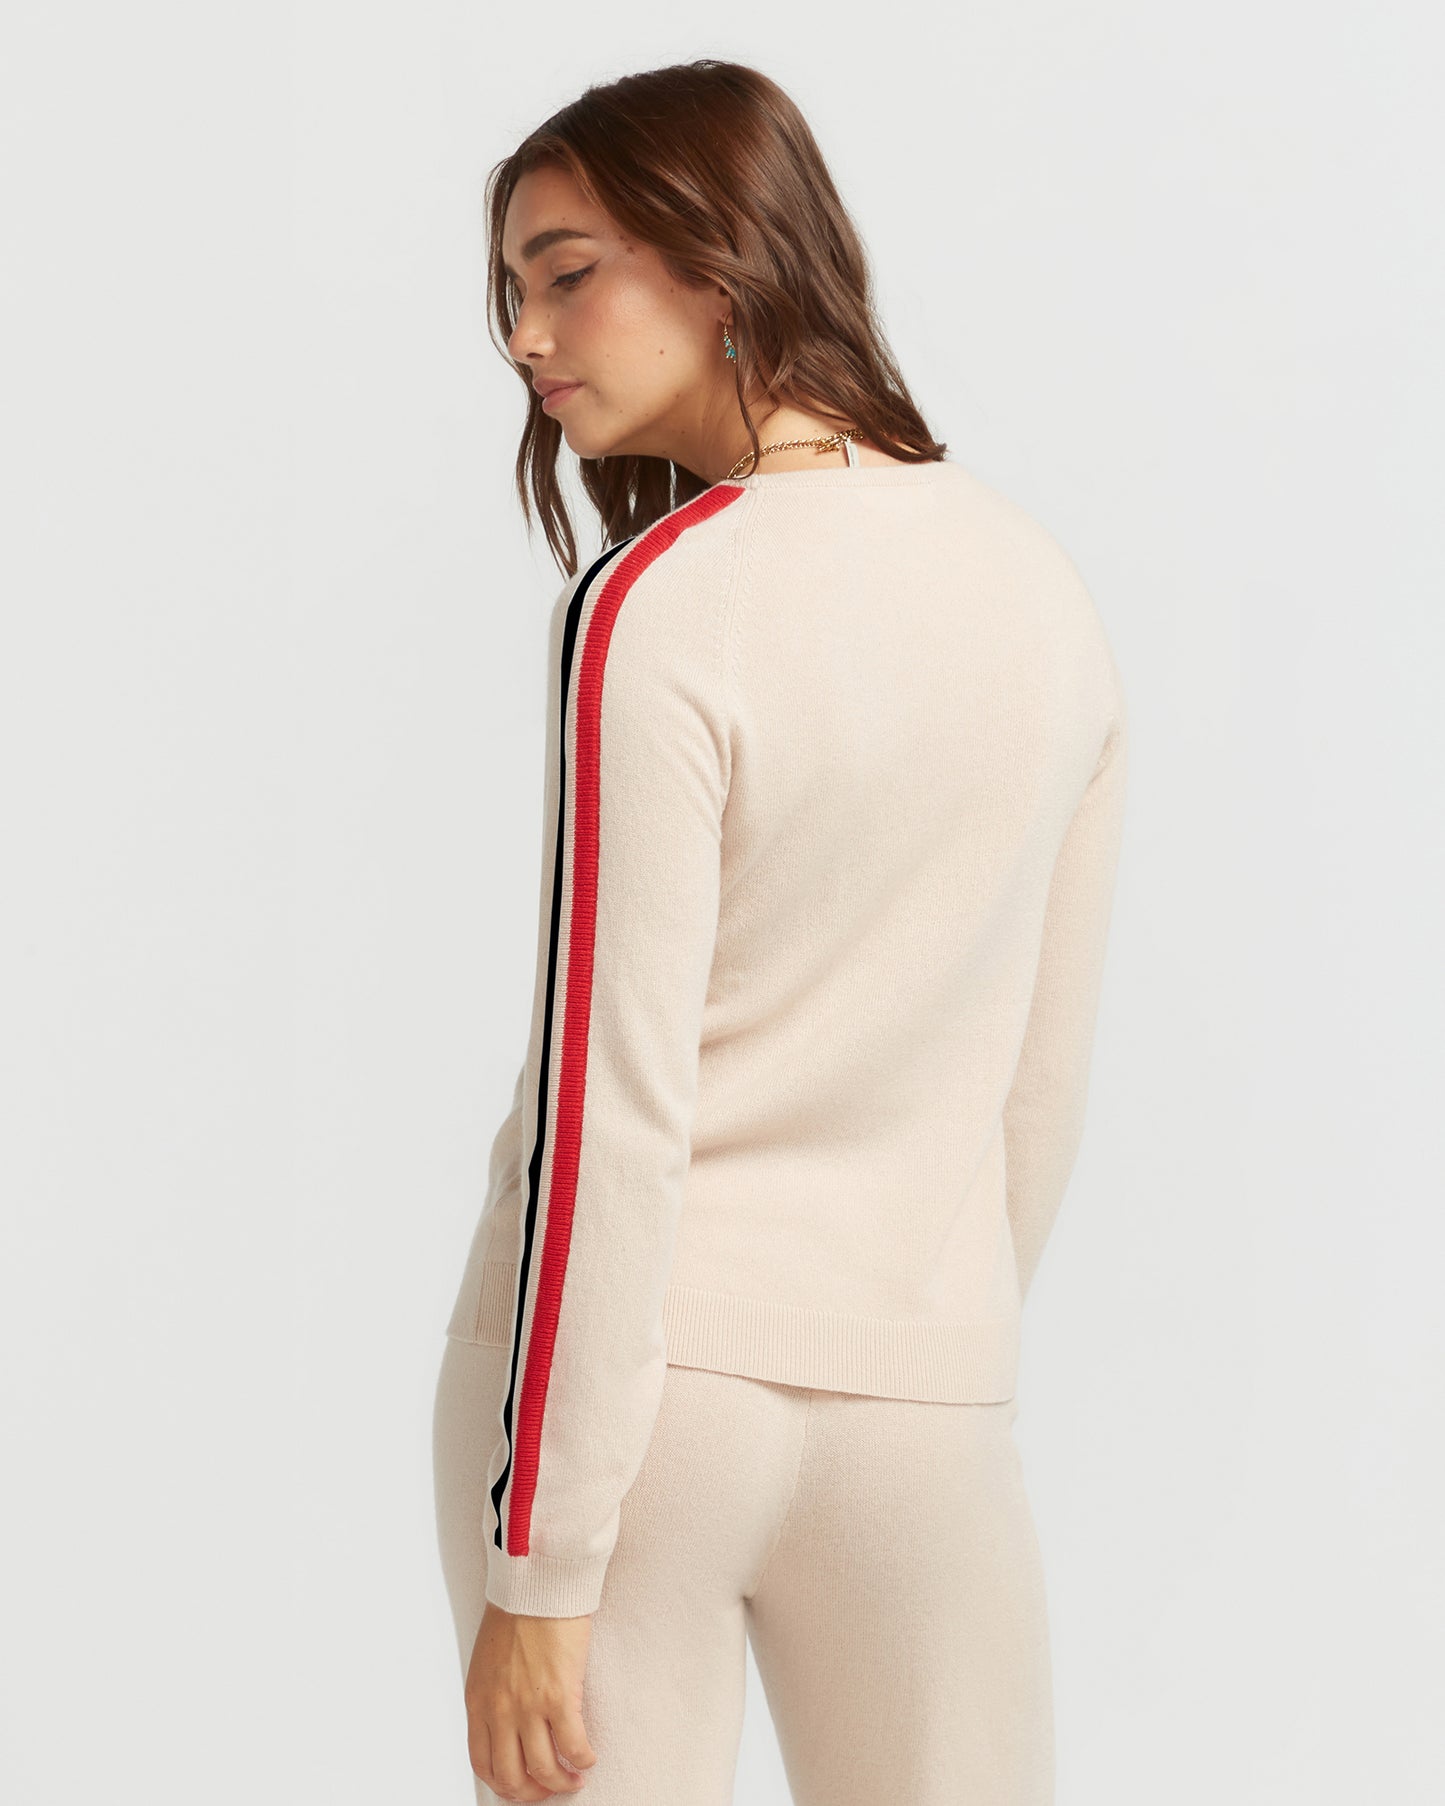 Cashmere & Wool French Racer 2 Crewneck Sweater - BEIGE